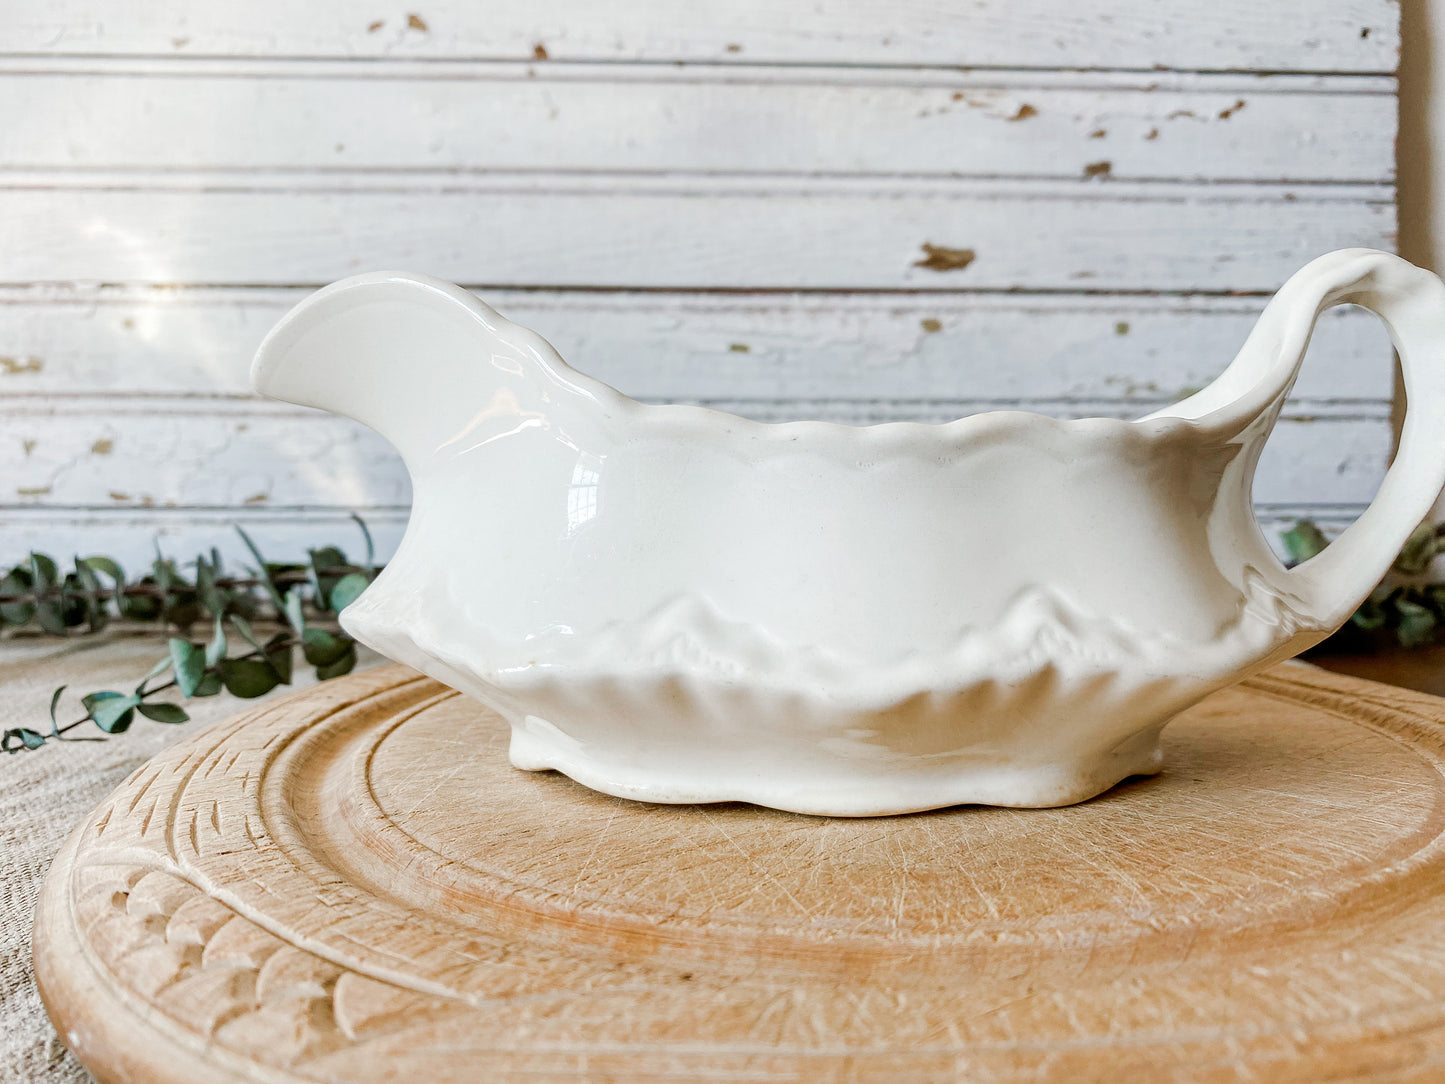 Antique White Stained Crazed Ironstone Gravy Boat by Homer Laughlin, 1920